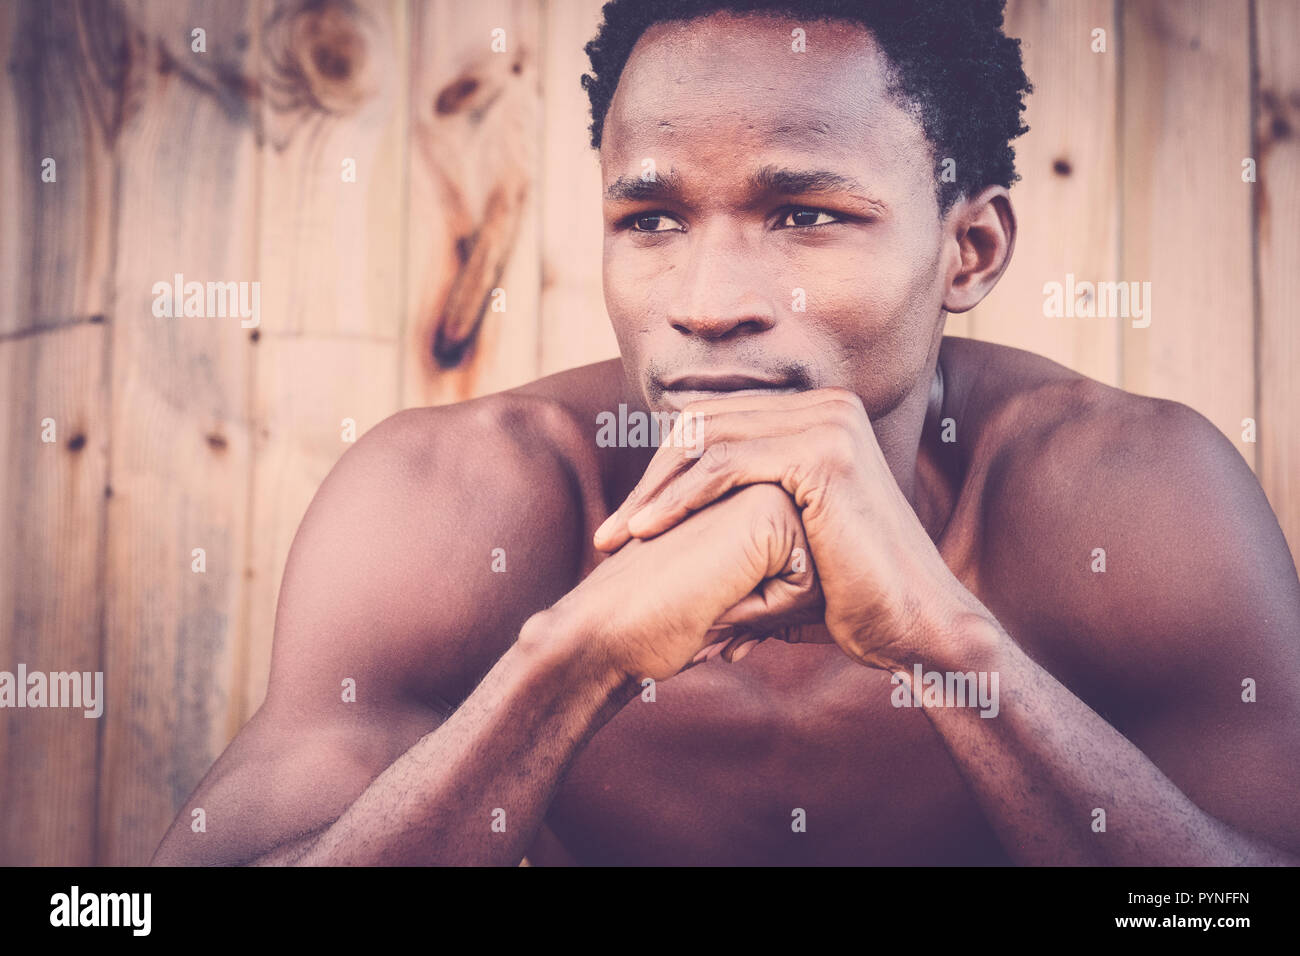 vintage tones retro portrait with black african young man posing in front of the camera. wood background defocused. young boy with thoughts alone. bea Stock Photo